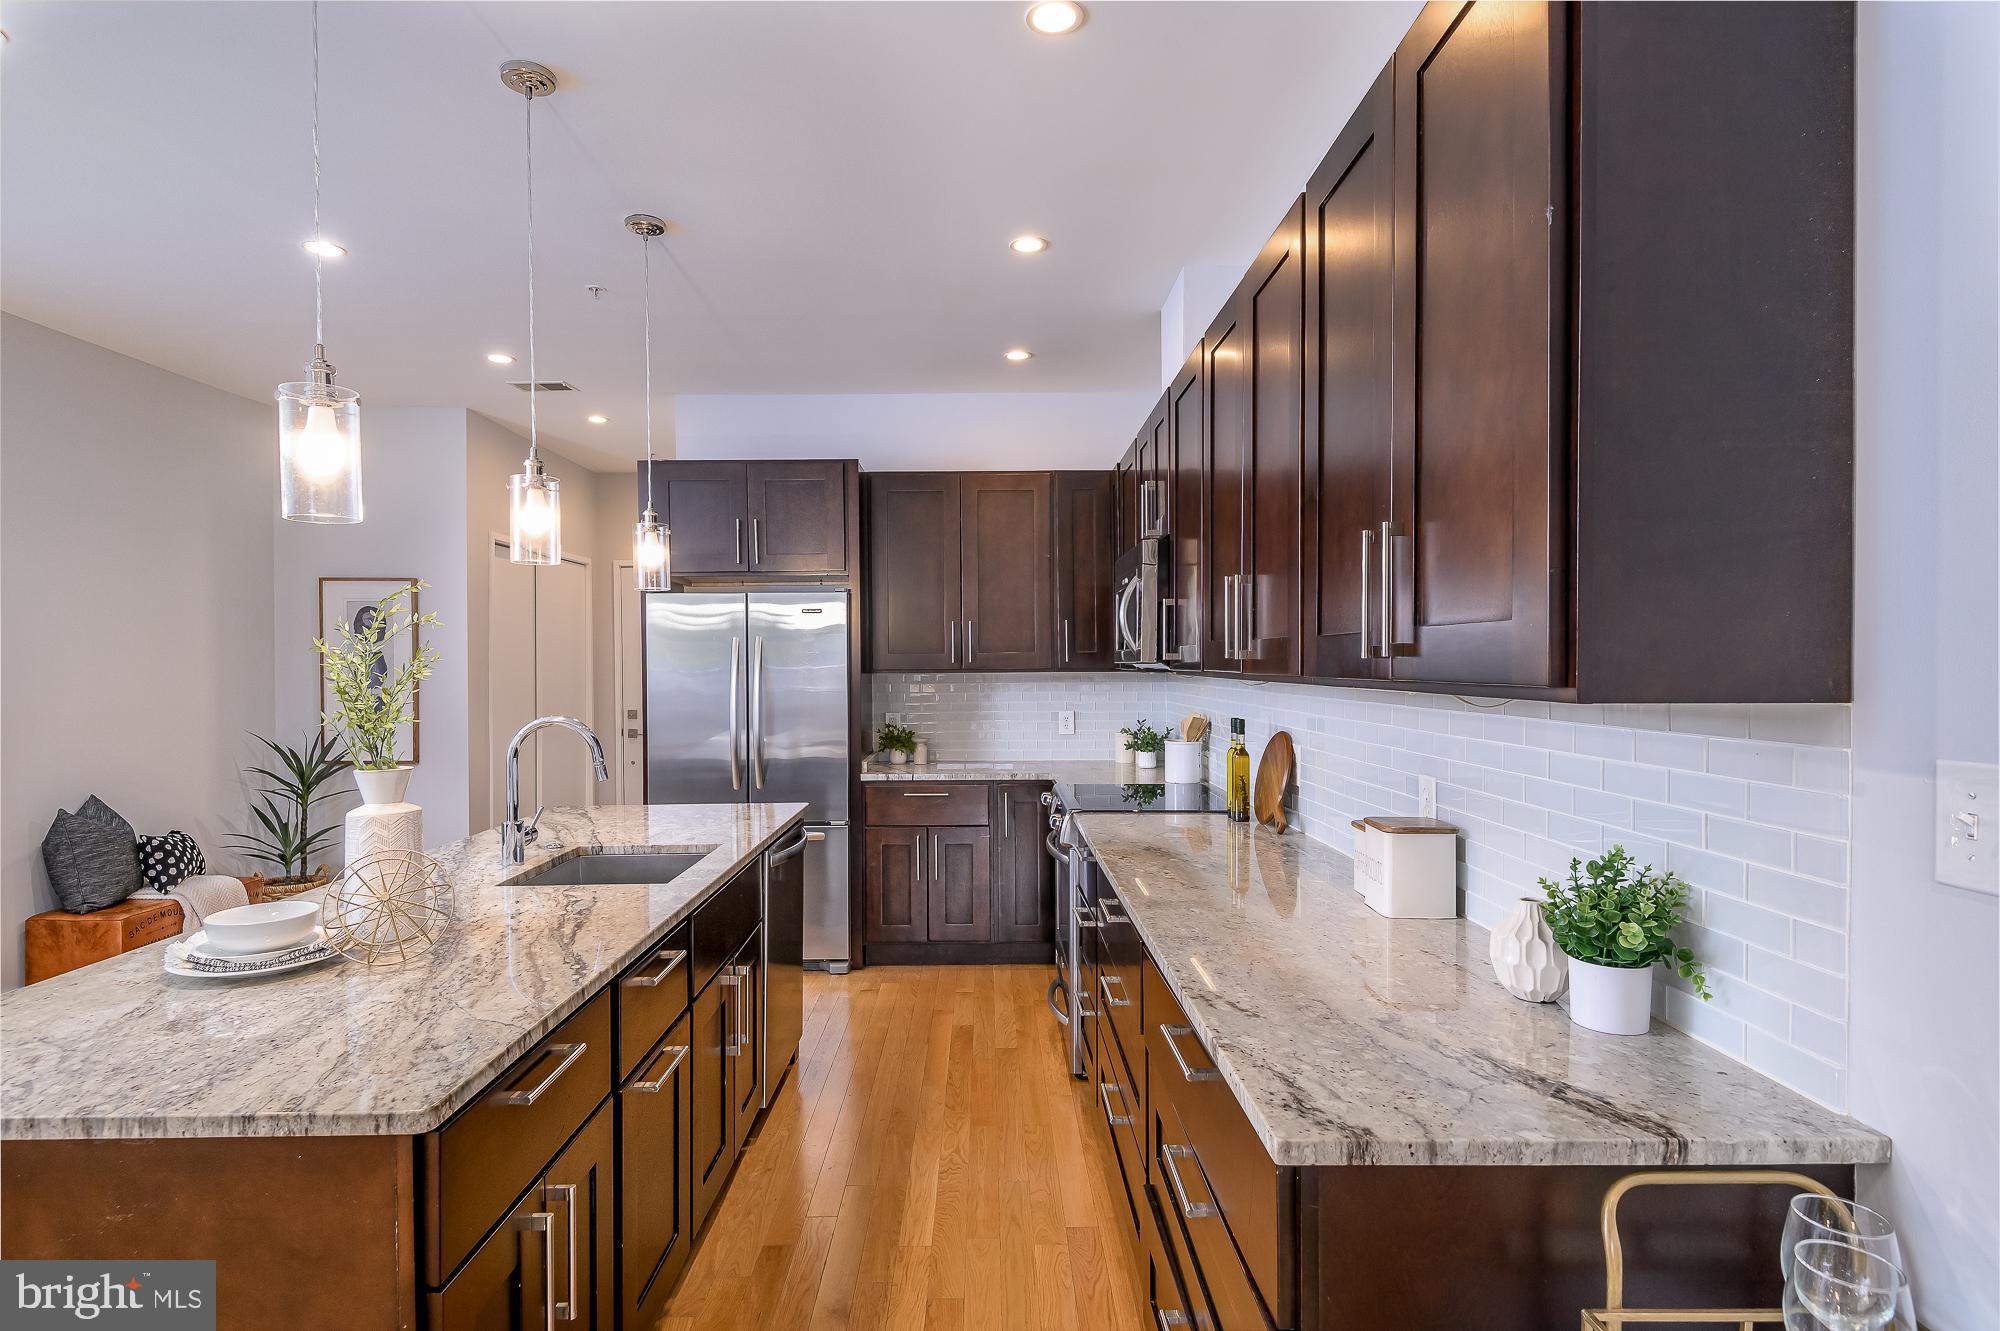 a kitchen with granite countertop lots of counter top space and wooden floor